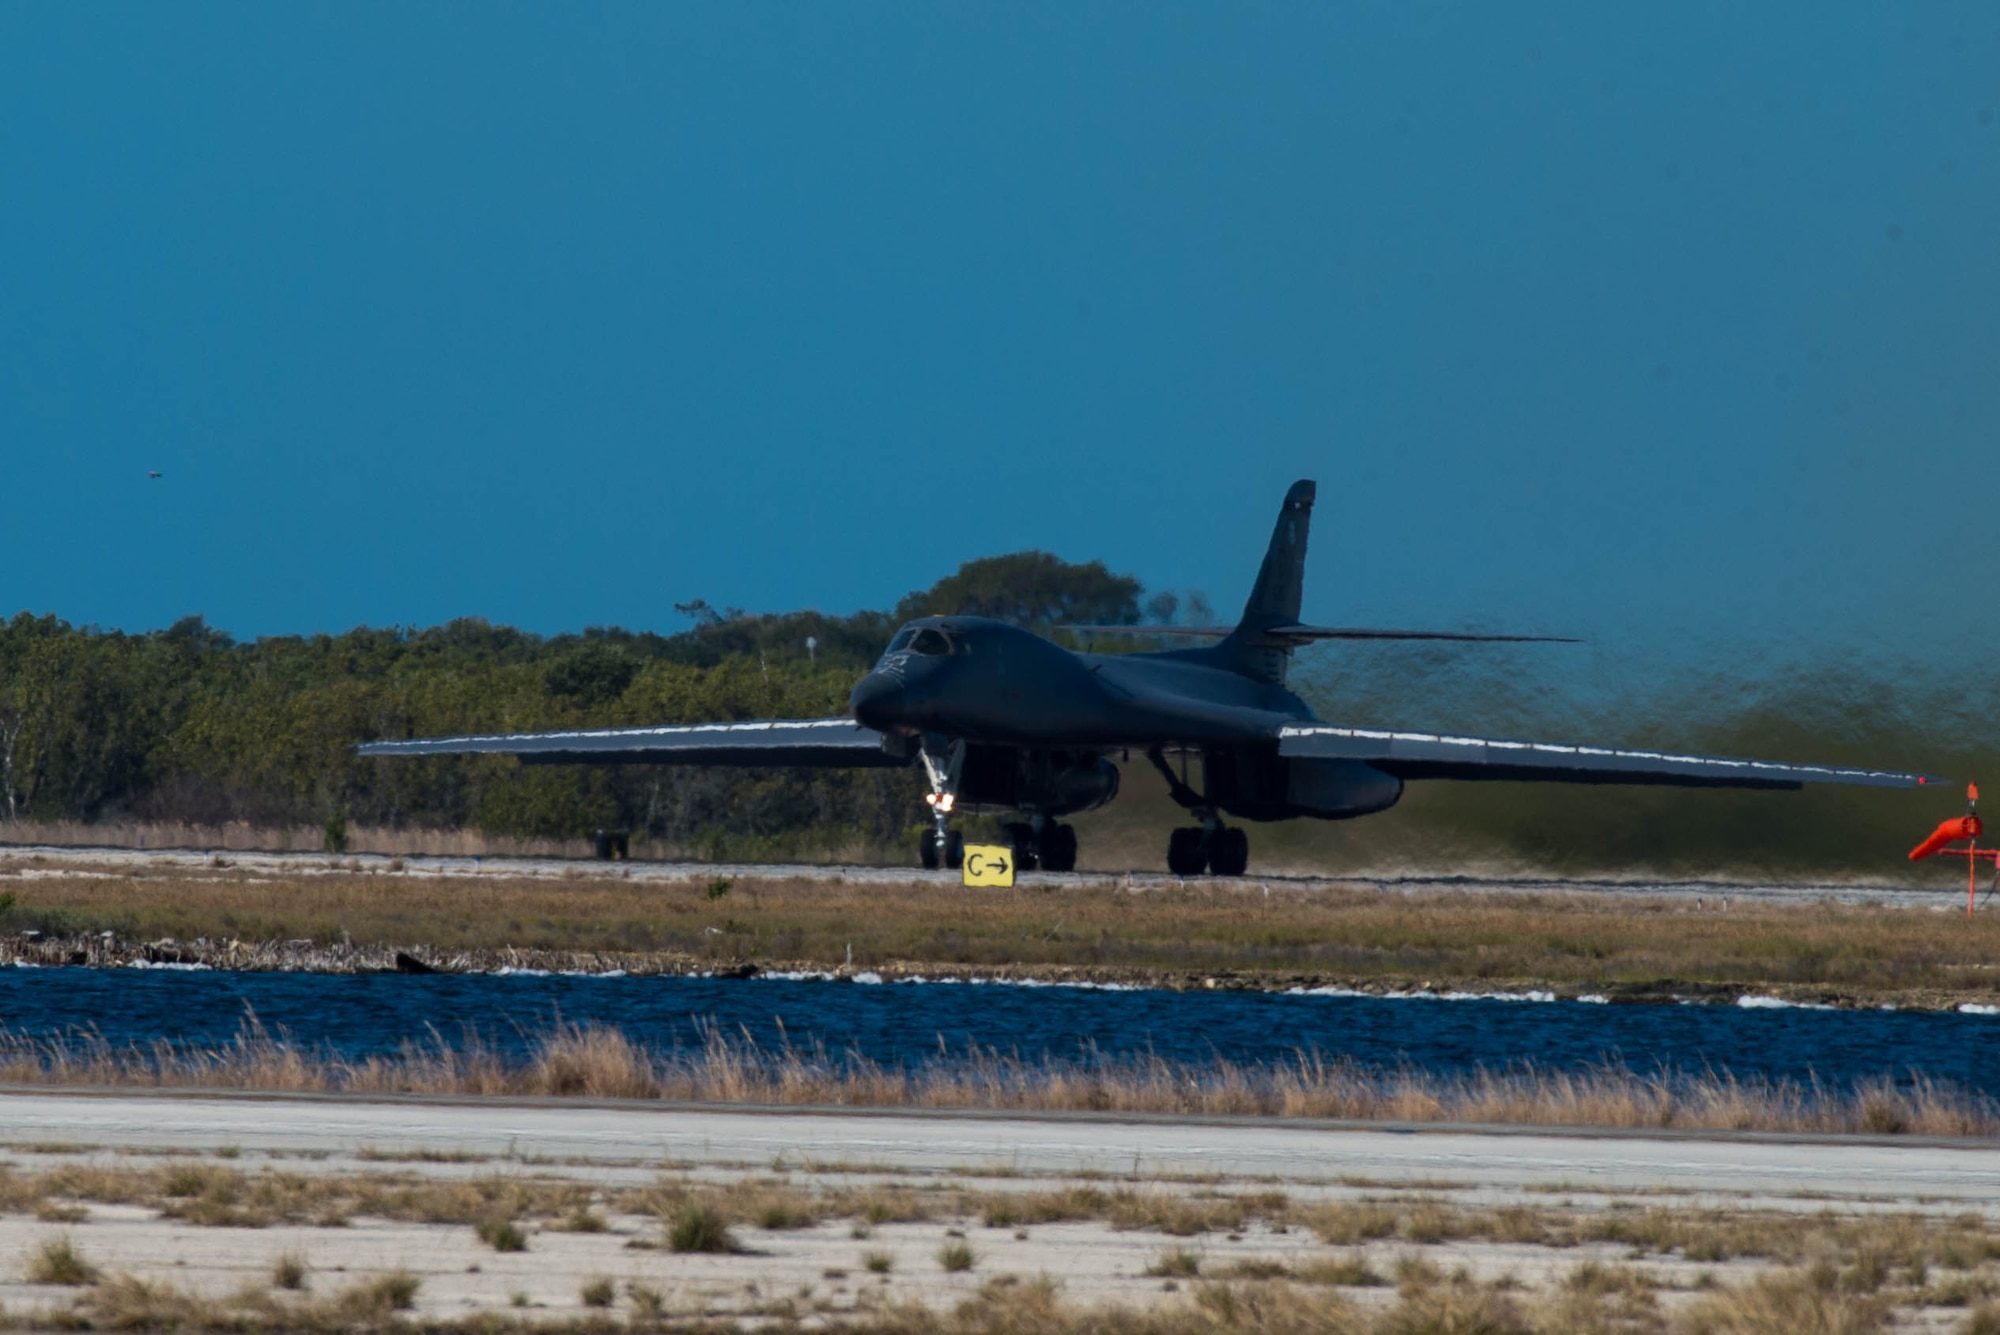 A B-1 Lancer waits for flight clearance at the end of the runway on Boca Chica Naval Air Station, Key West Fla., March 22, 2017. Airmen from the 489th Bomb Group and the 7th Bomb Wing supported the Drug Enforcement Agency, FBI, Coast Guard and 15 other government agencies in the fight against illicit drugs. (U.S. Air Force photo by Staff Sgt. Jason McCasland/released)